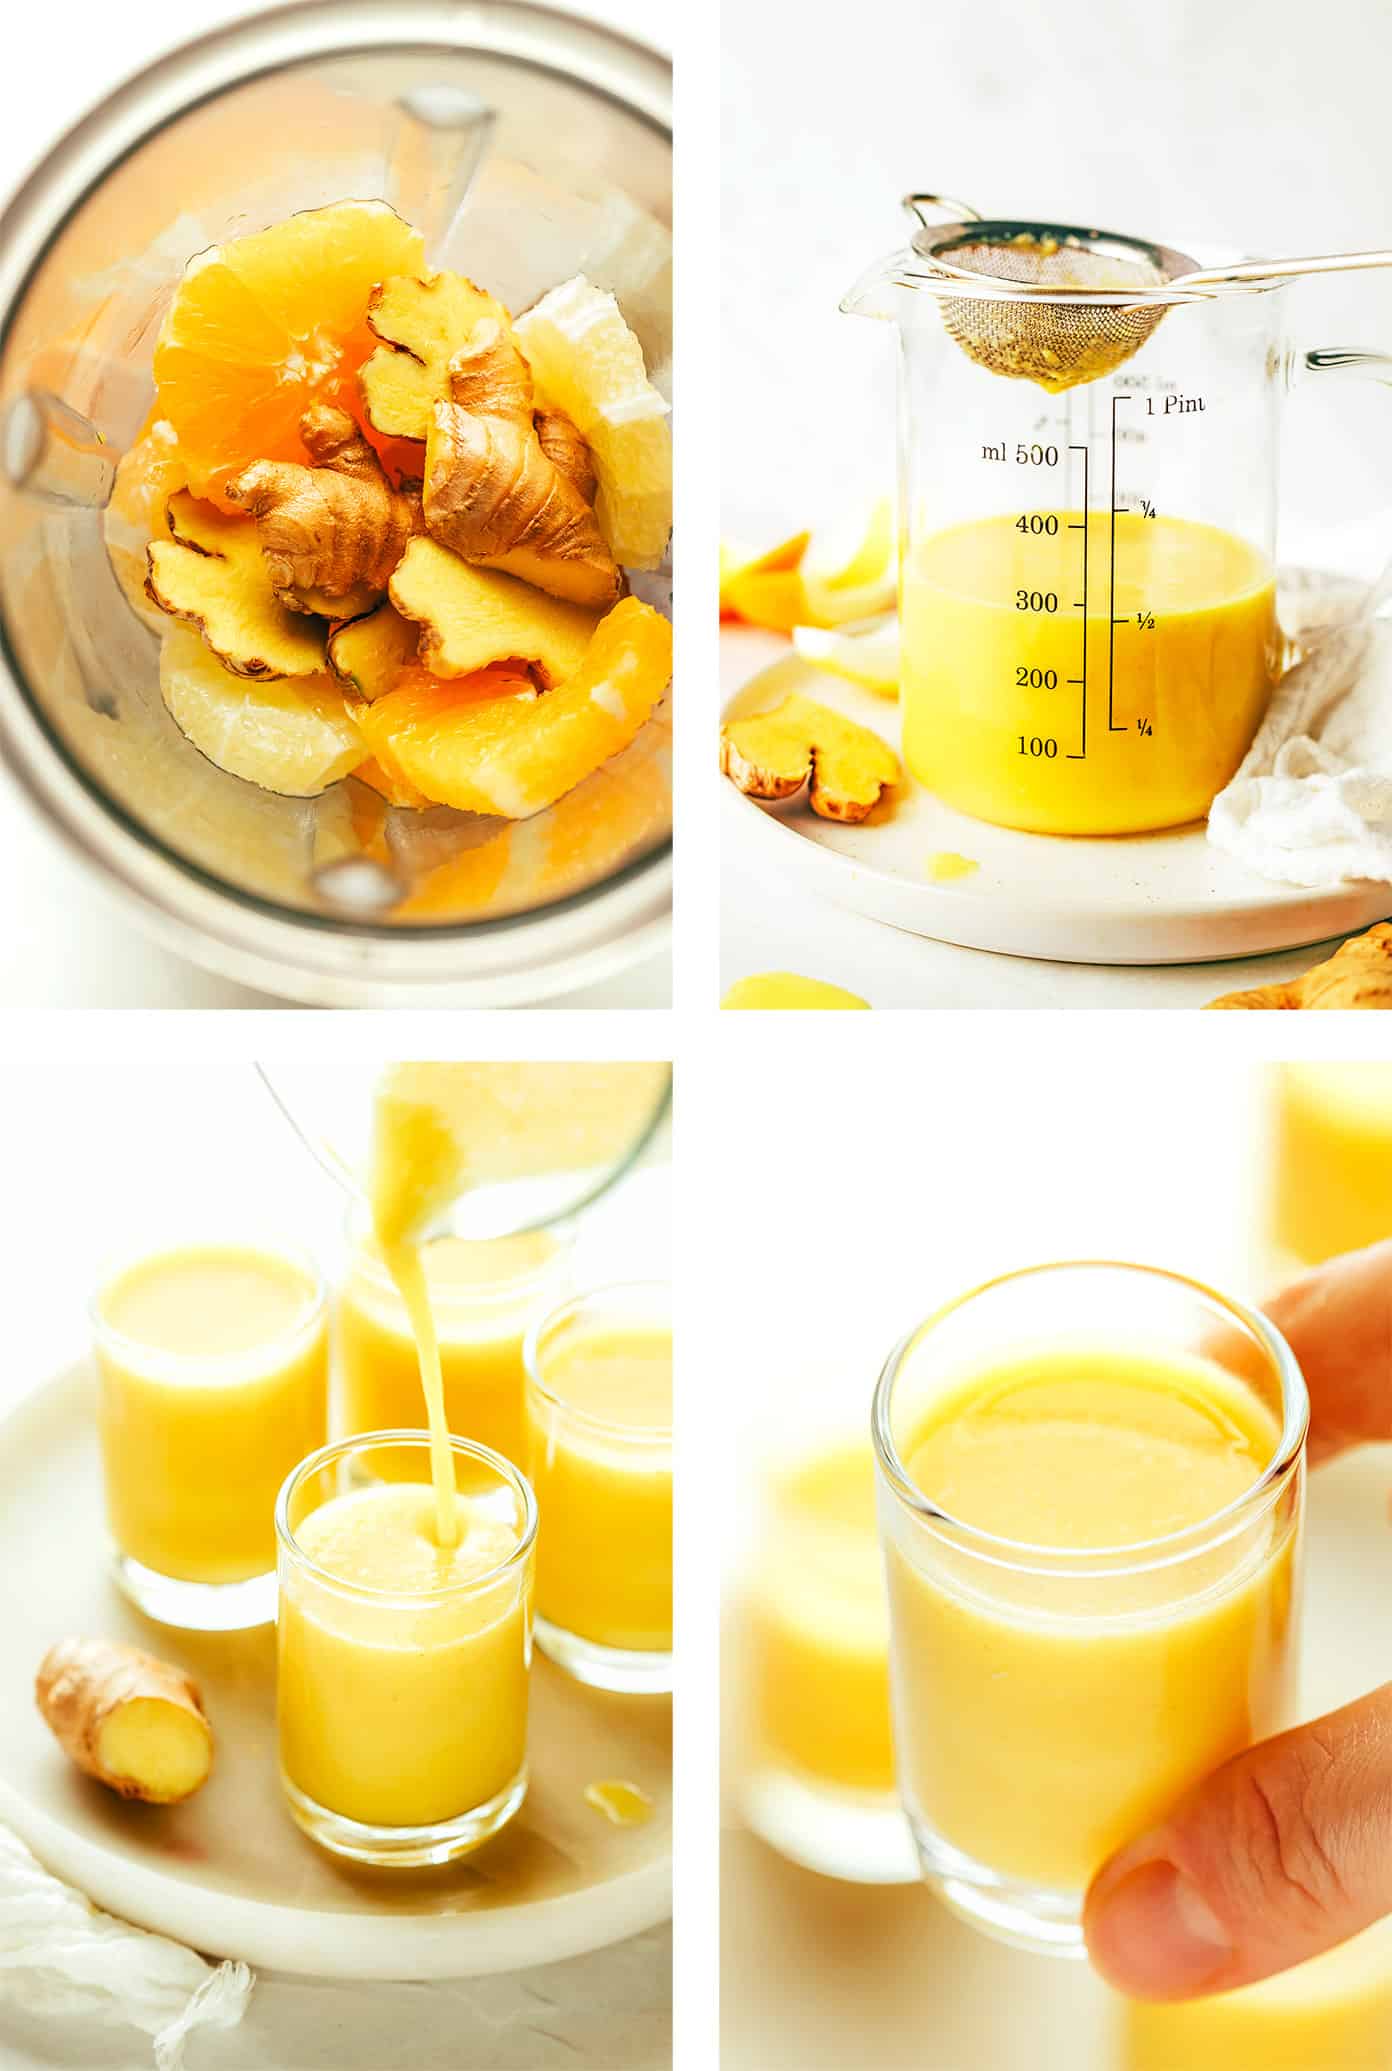 Step by Step Photos Showing How To Make Ginger Shots